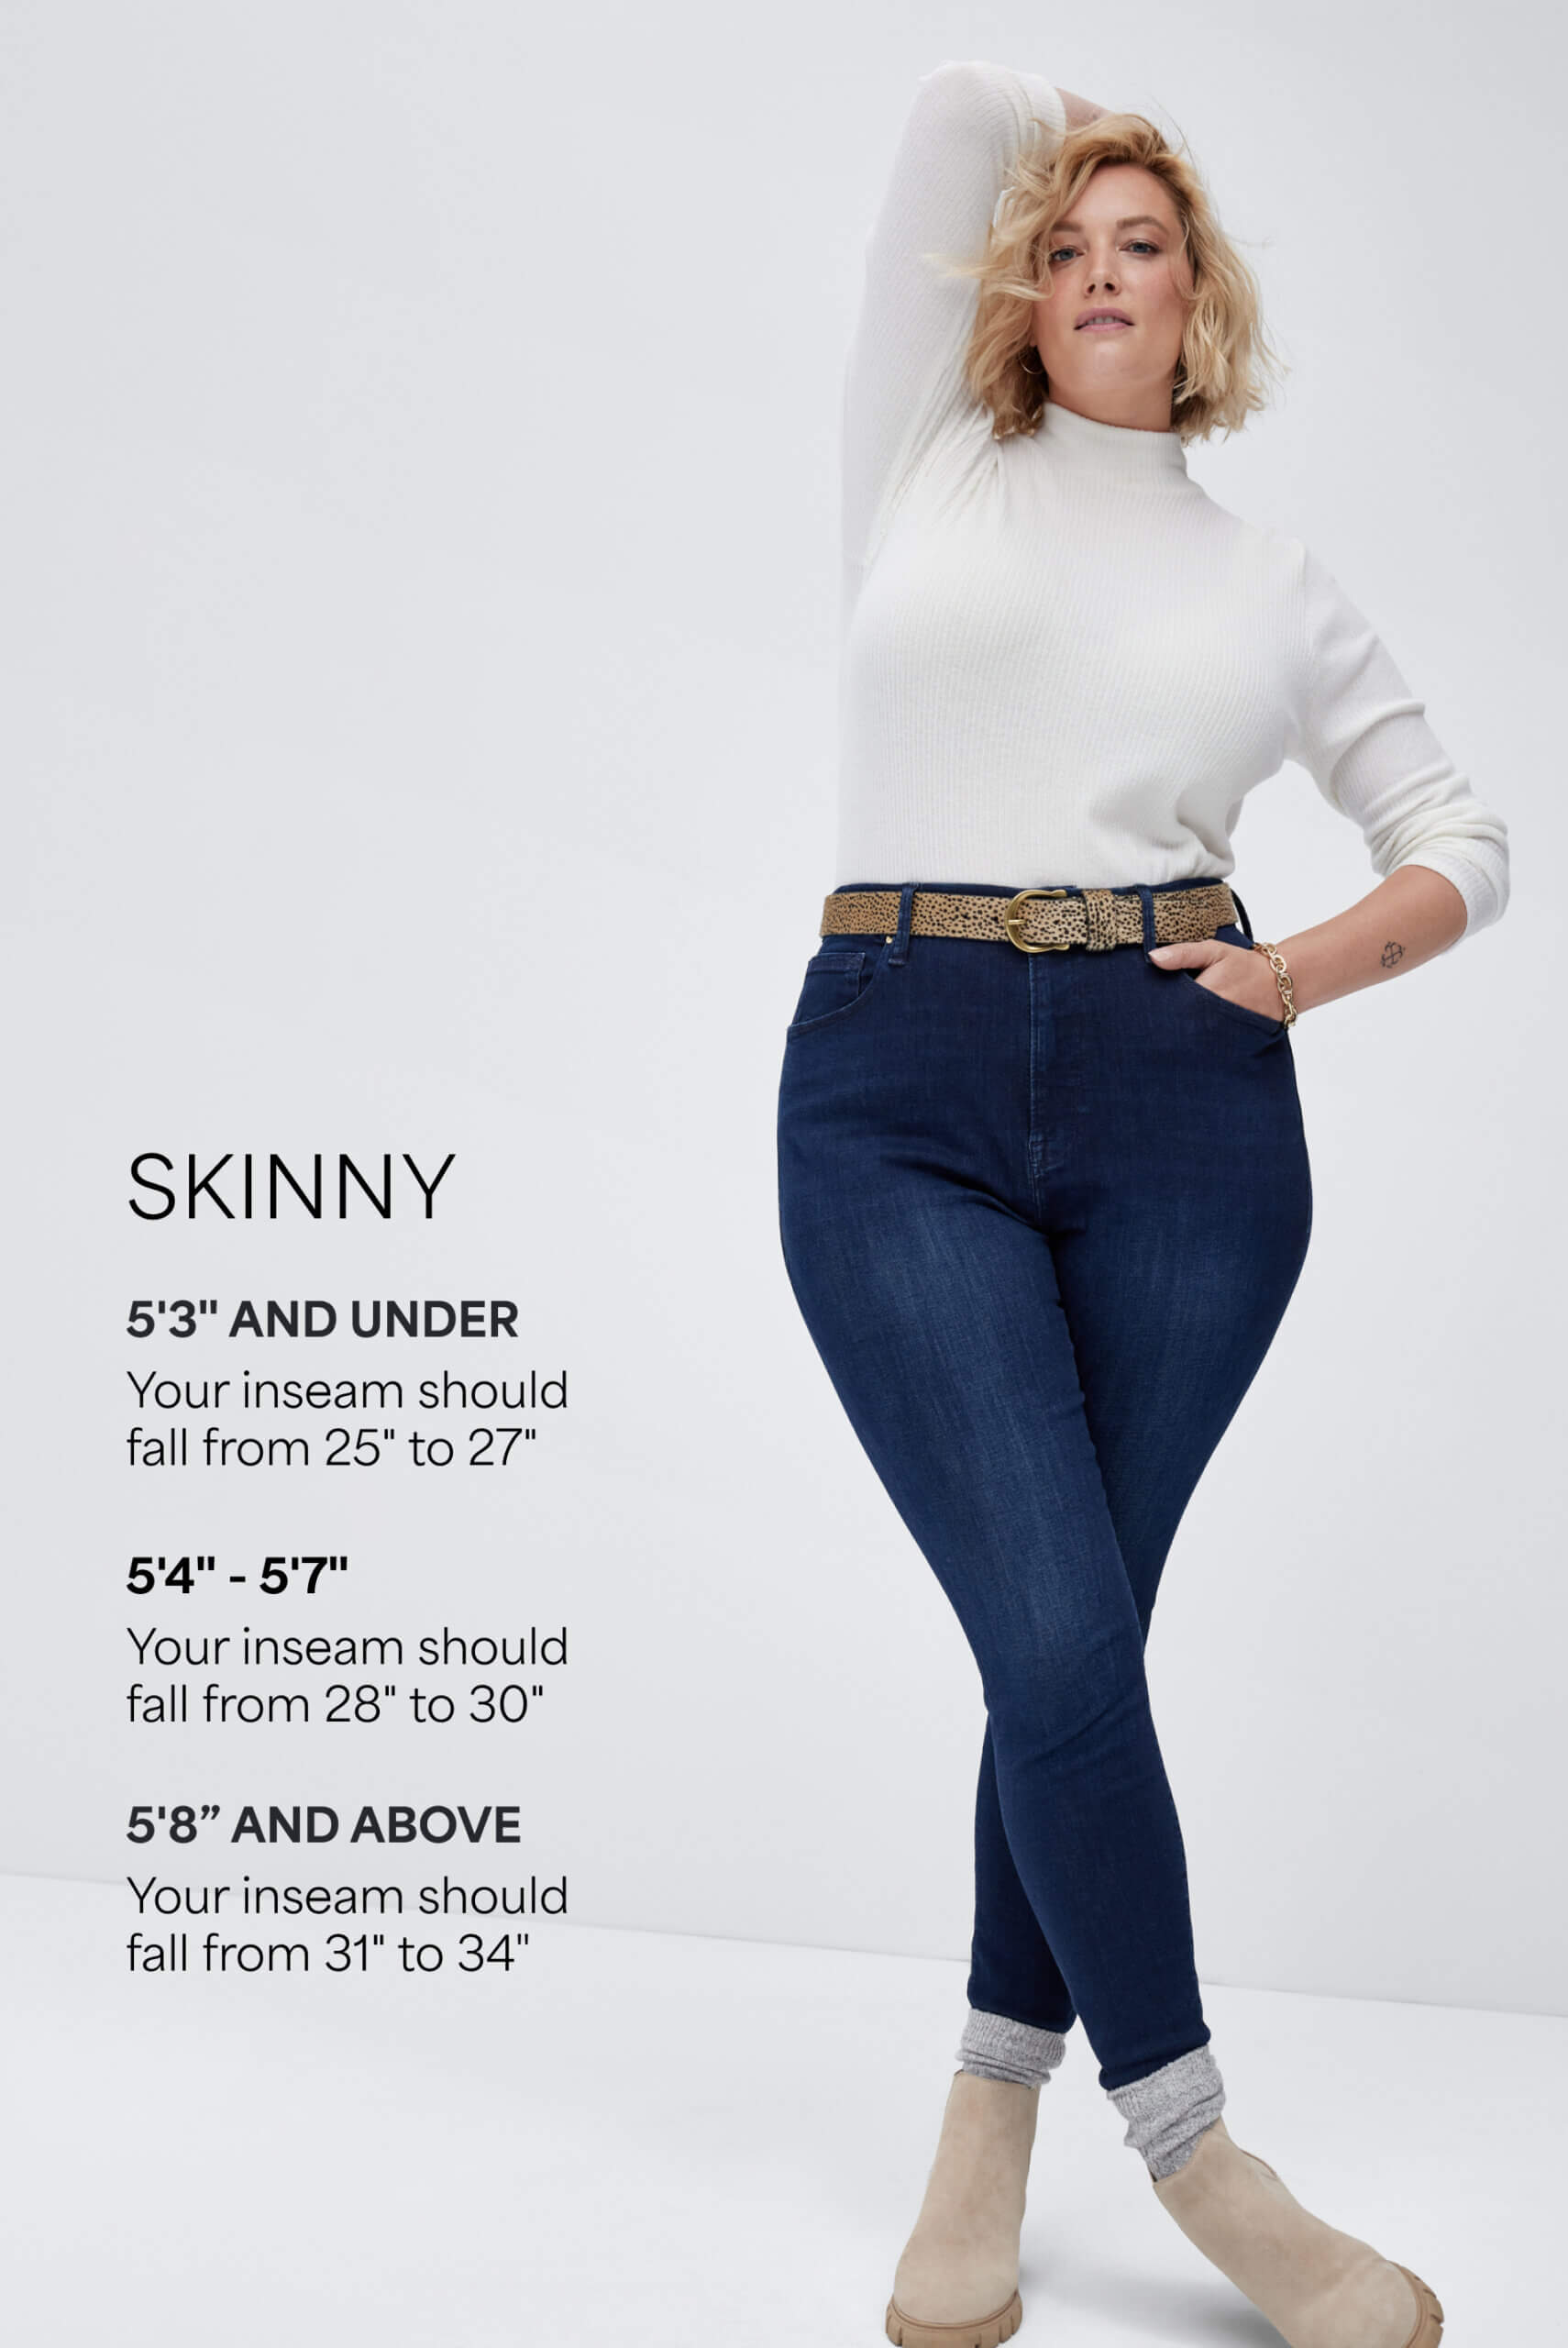 Denim inseam chart by height and types of jeans